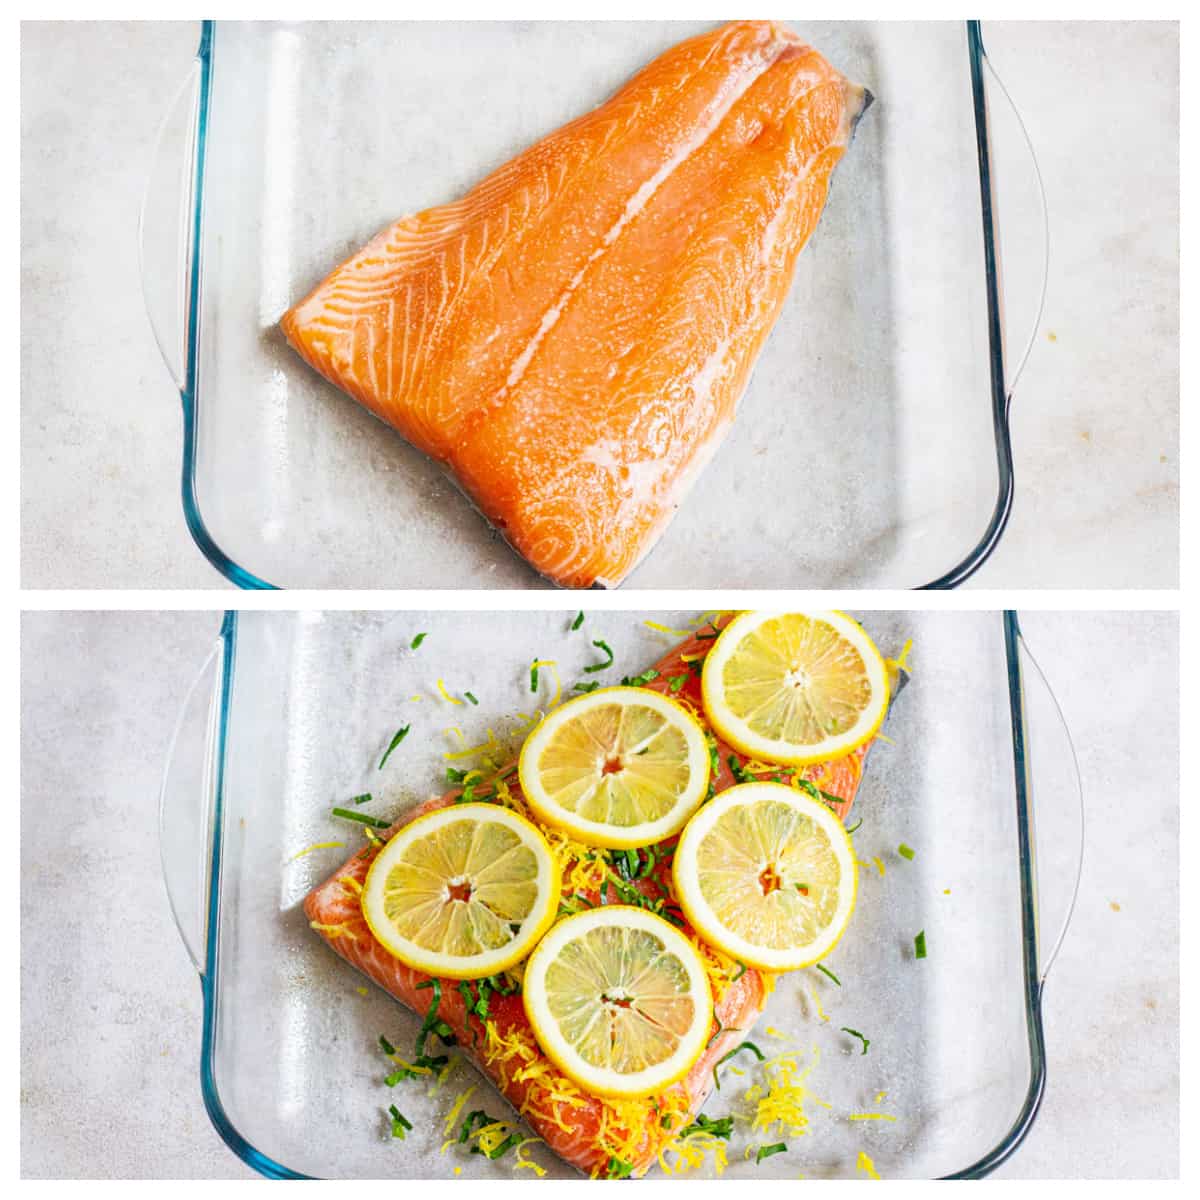 Salmon fillet in a baking dish, and topped with Old Bay Seasoning, lemon and herbs.